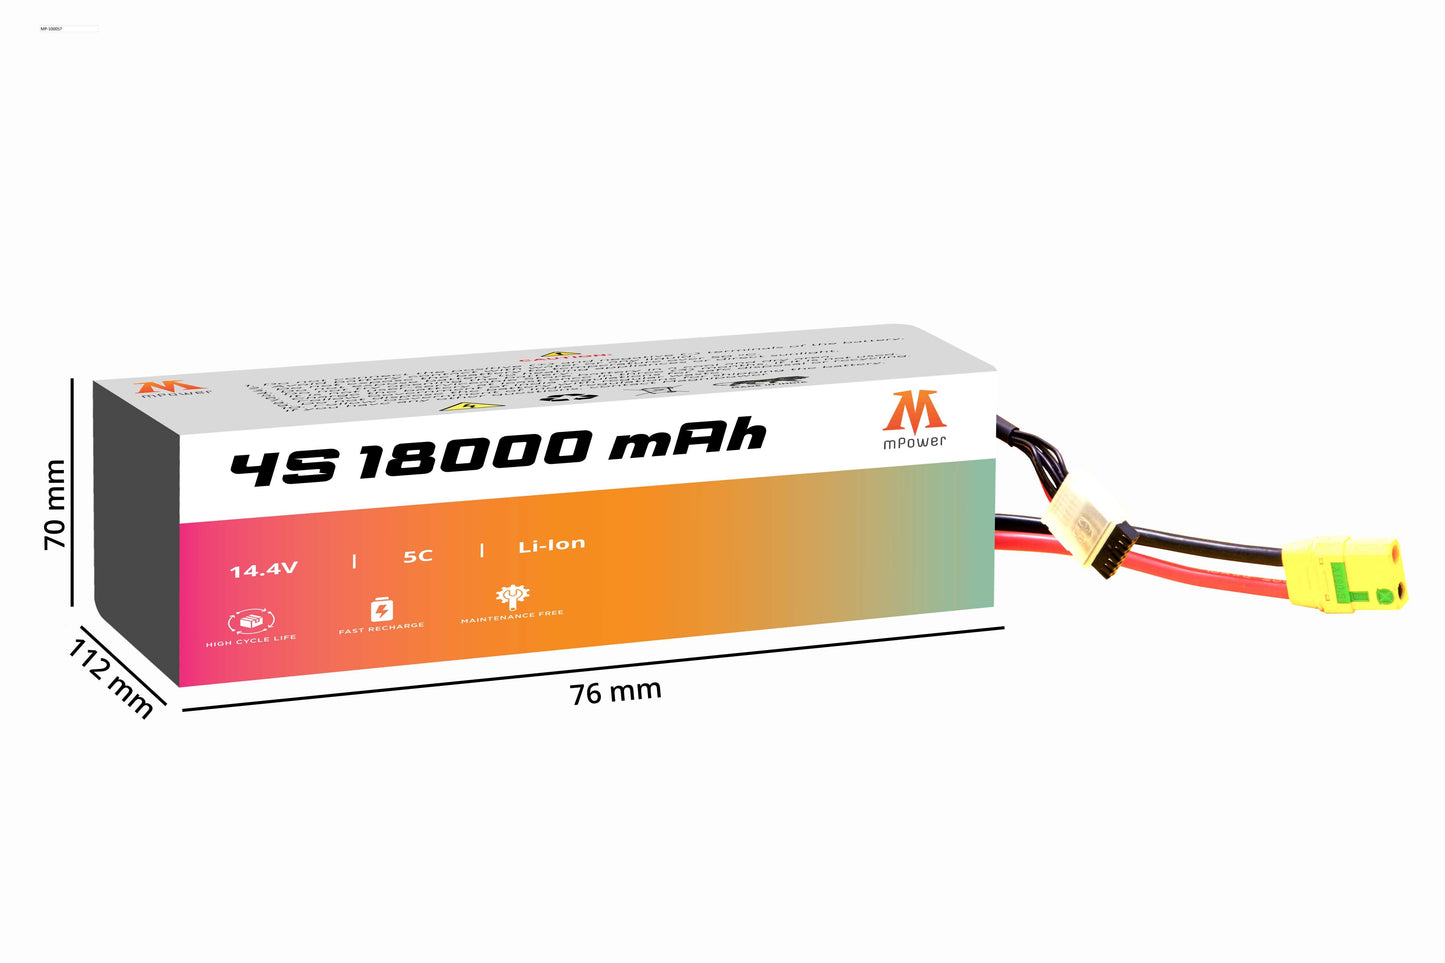 mPower 4S 18000mAh Lithium-Ion Battery for Survey Drones